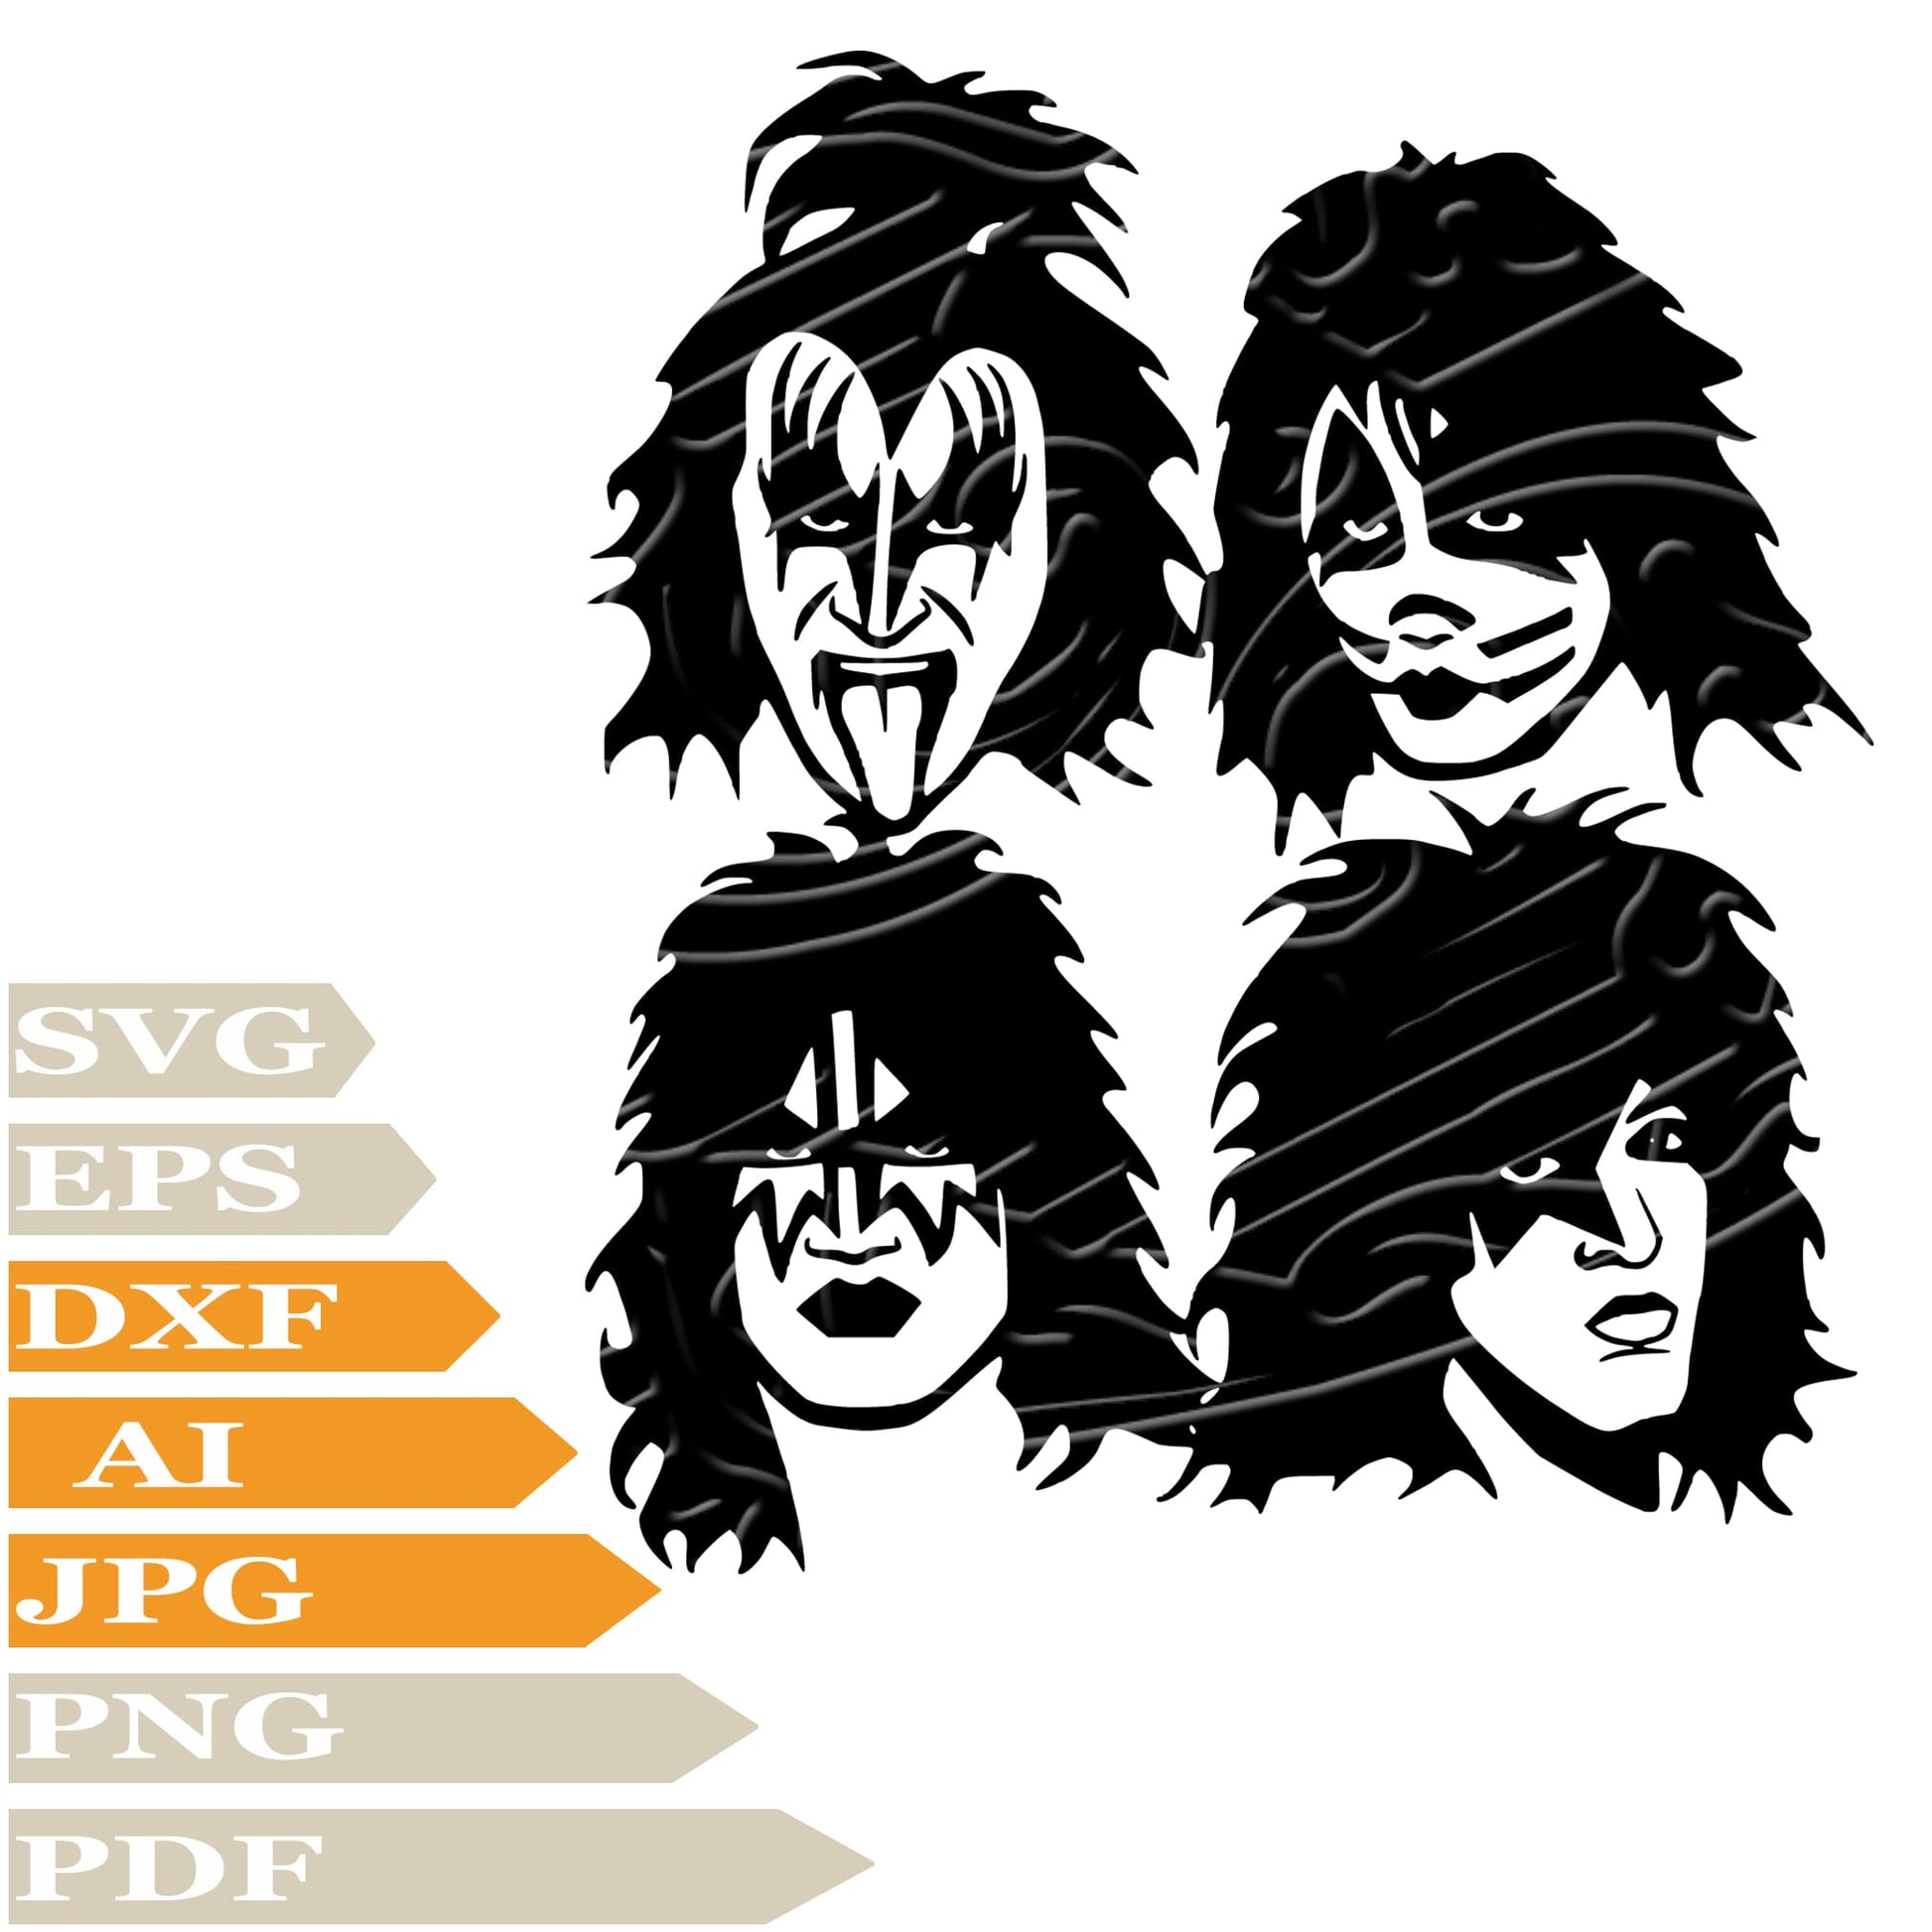 Kiss, Kiss Music Band Svg File, Image Cut, Png, For Tattoo, Silhouette, Digital Vector Download, Cut File, Clipart, For Cricut